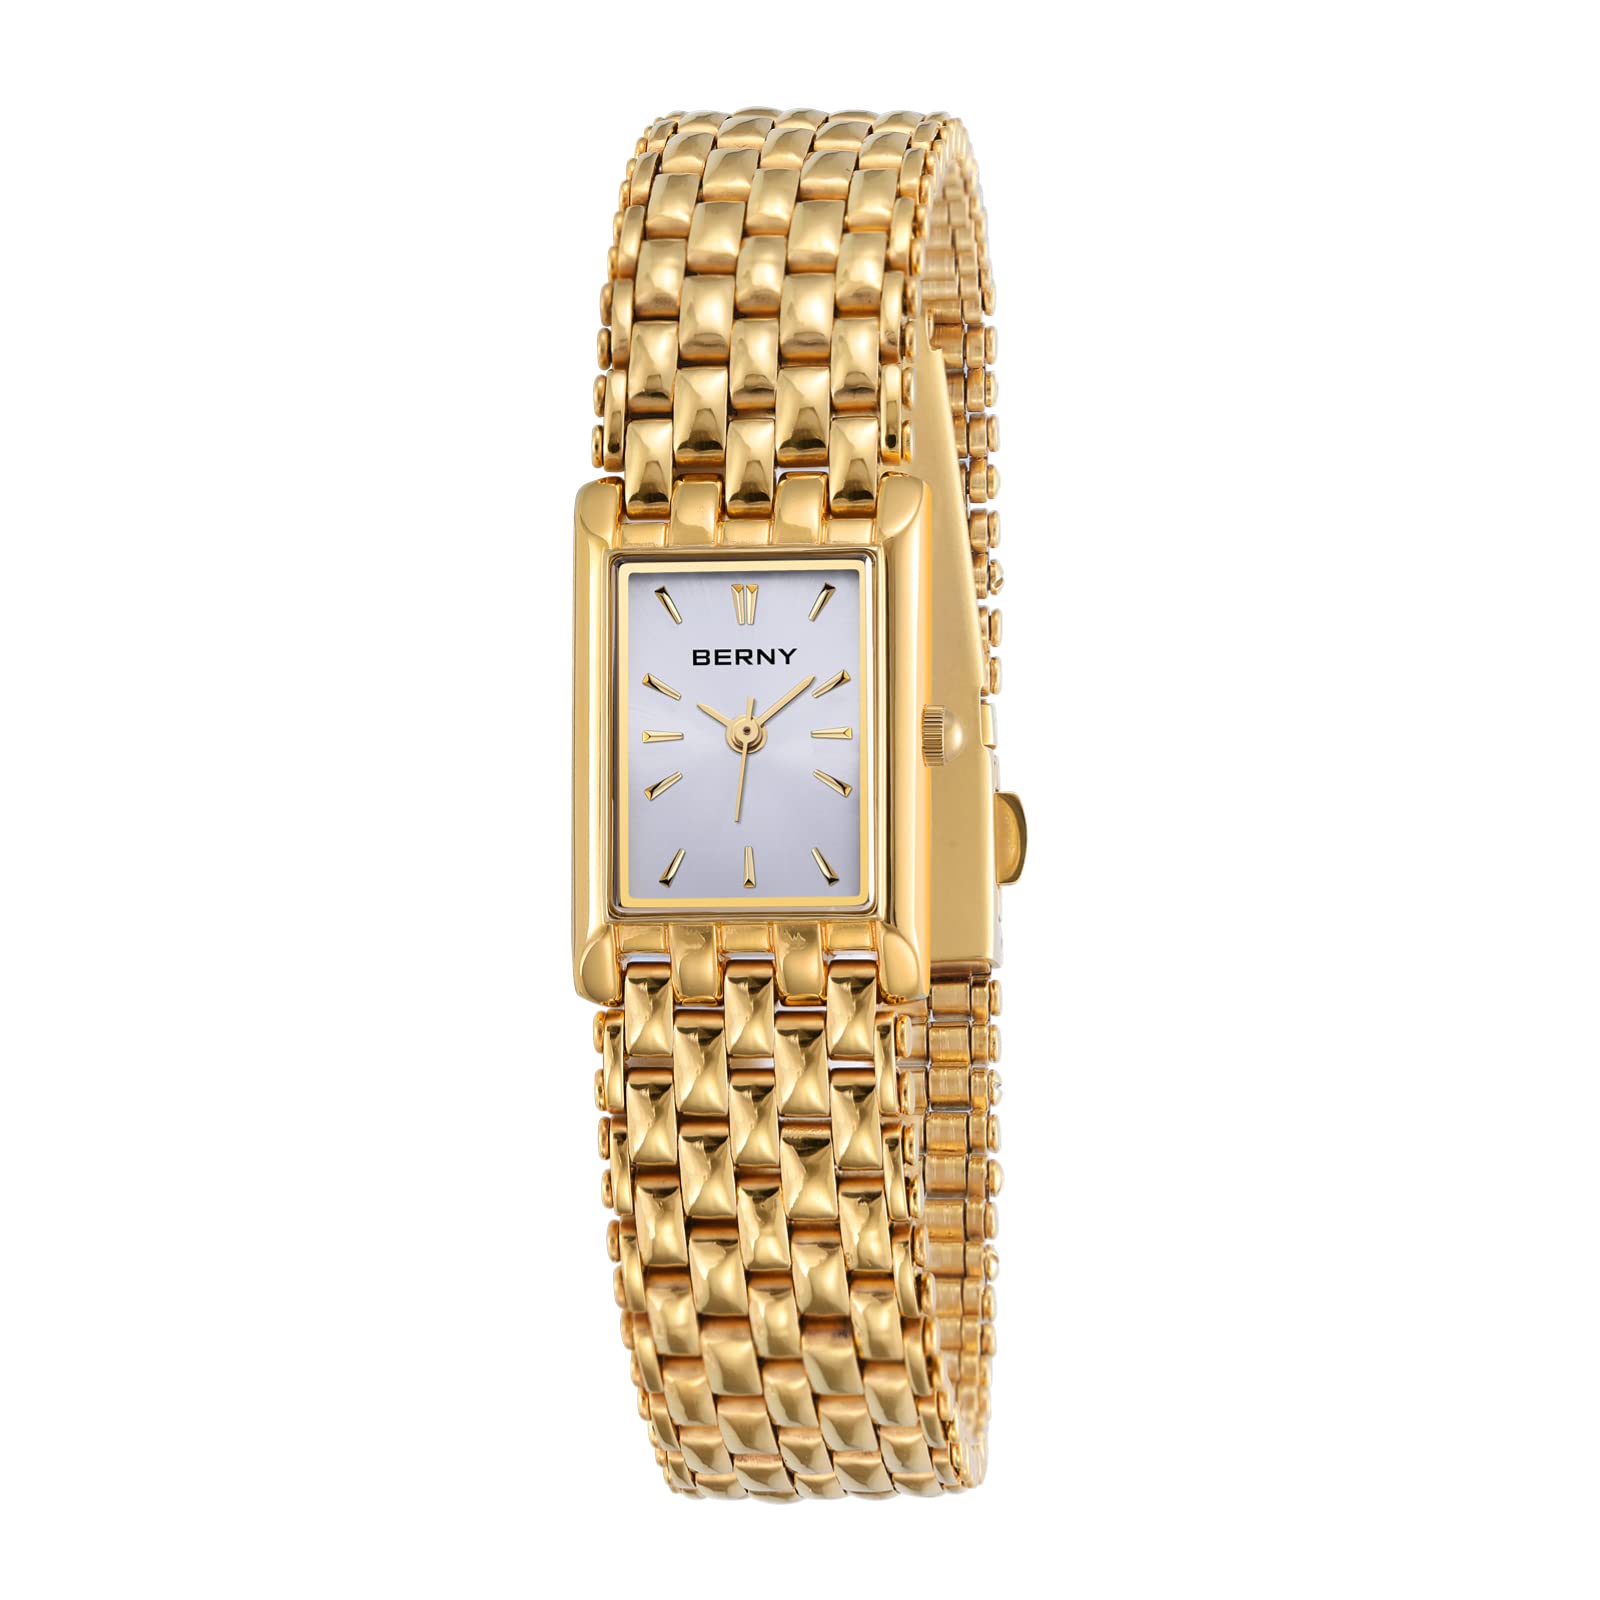 BERNY Gold Watches for Women Updated Ladies Quartz Wrist Watches Stainless Steel Band Womens Small Gold Watch Luxury Casual Fashion Bracelet Tools Included